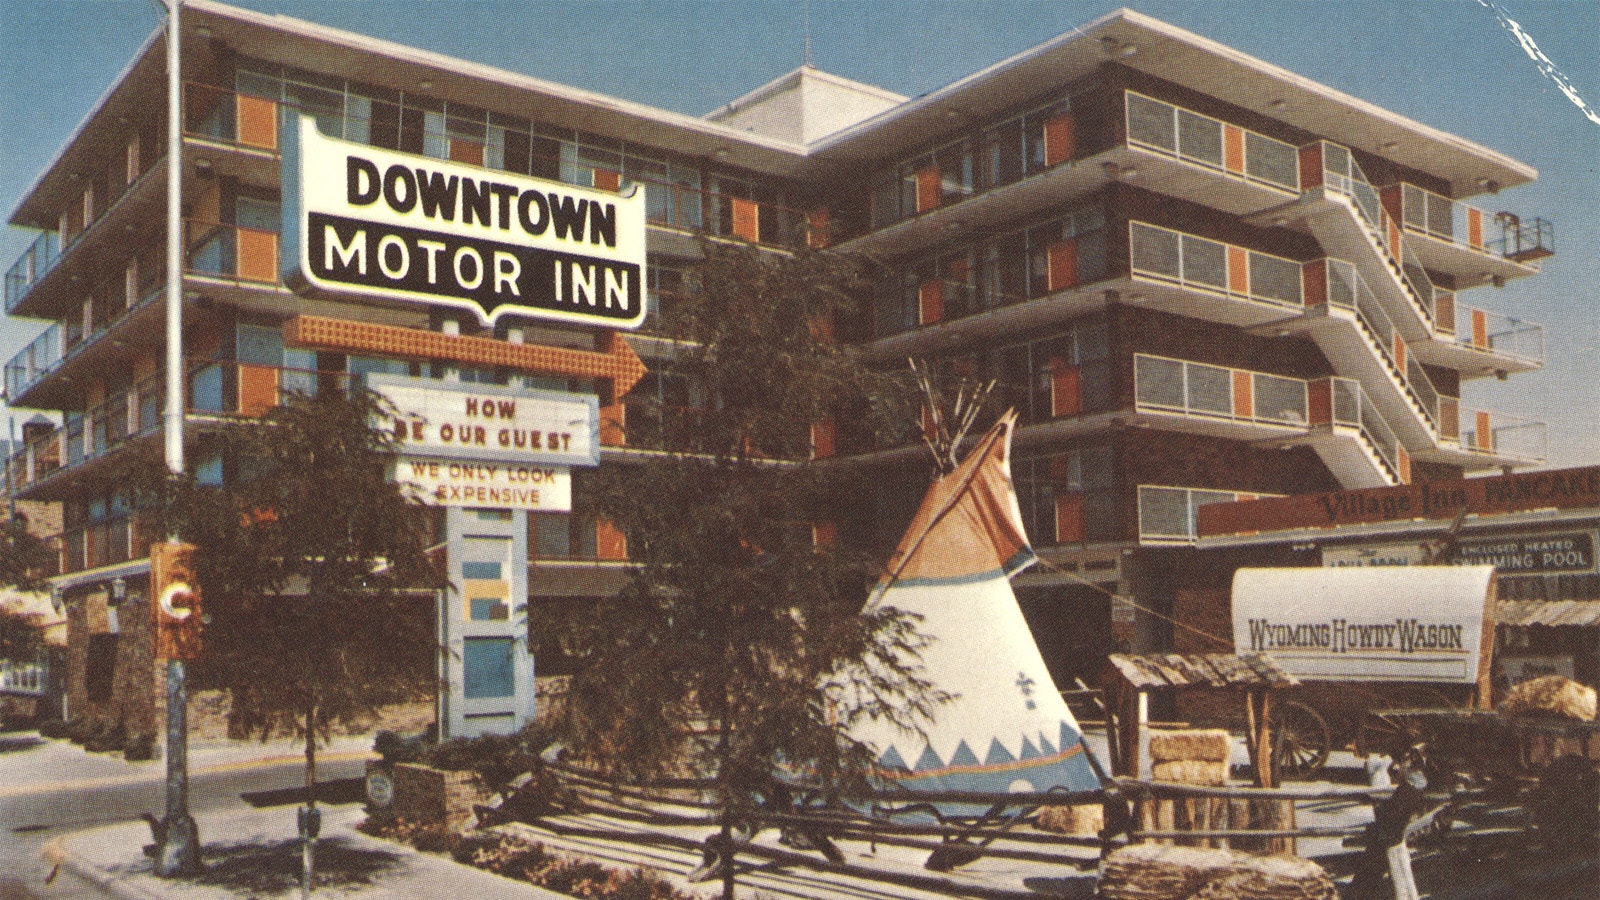 A vintage postcard shows the iconic Downtown Motor Inn in Cheyenne in the 1960s.